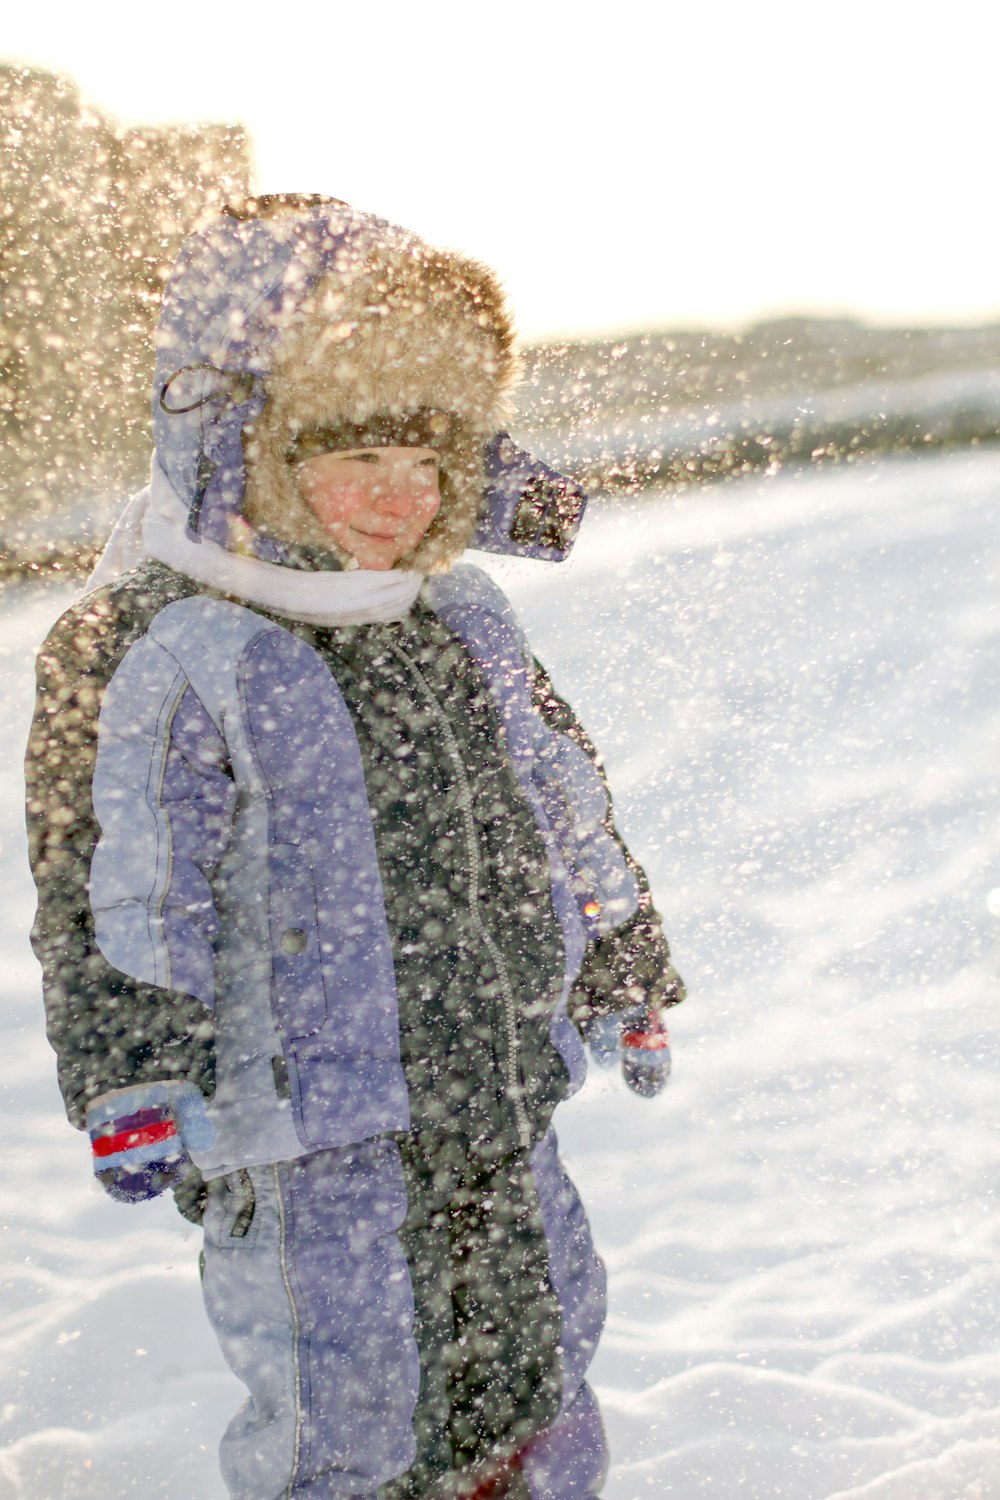 a young boy standing in the snow with a snowboard